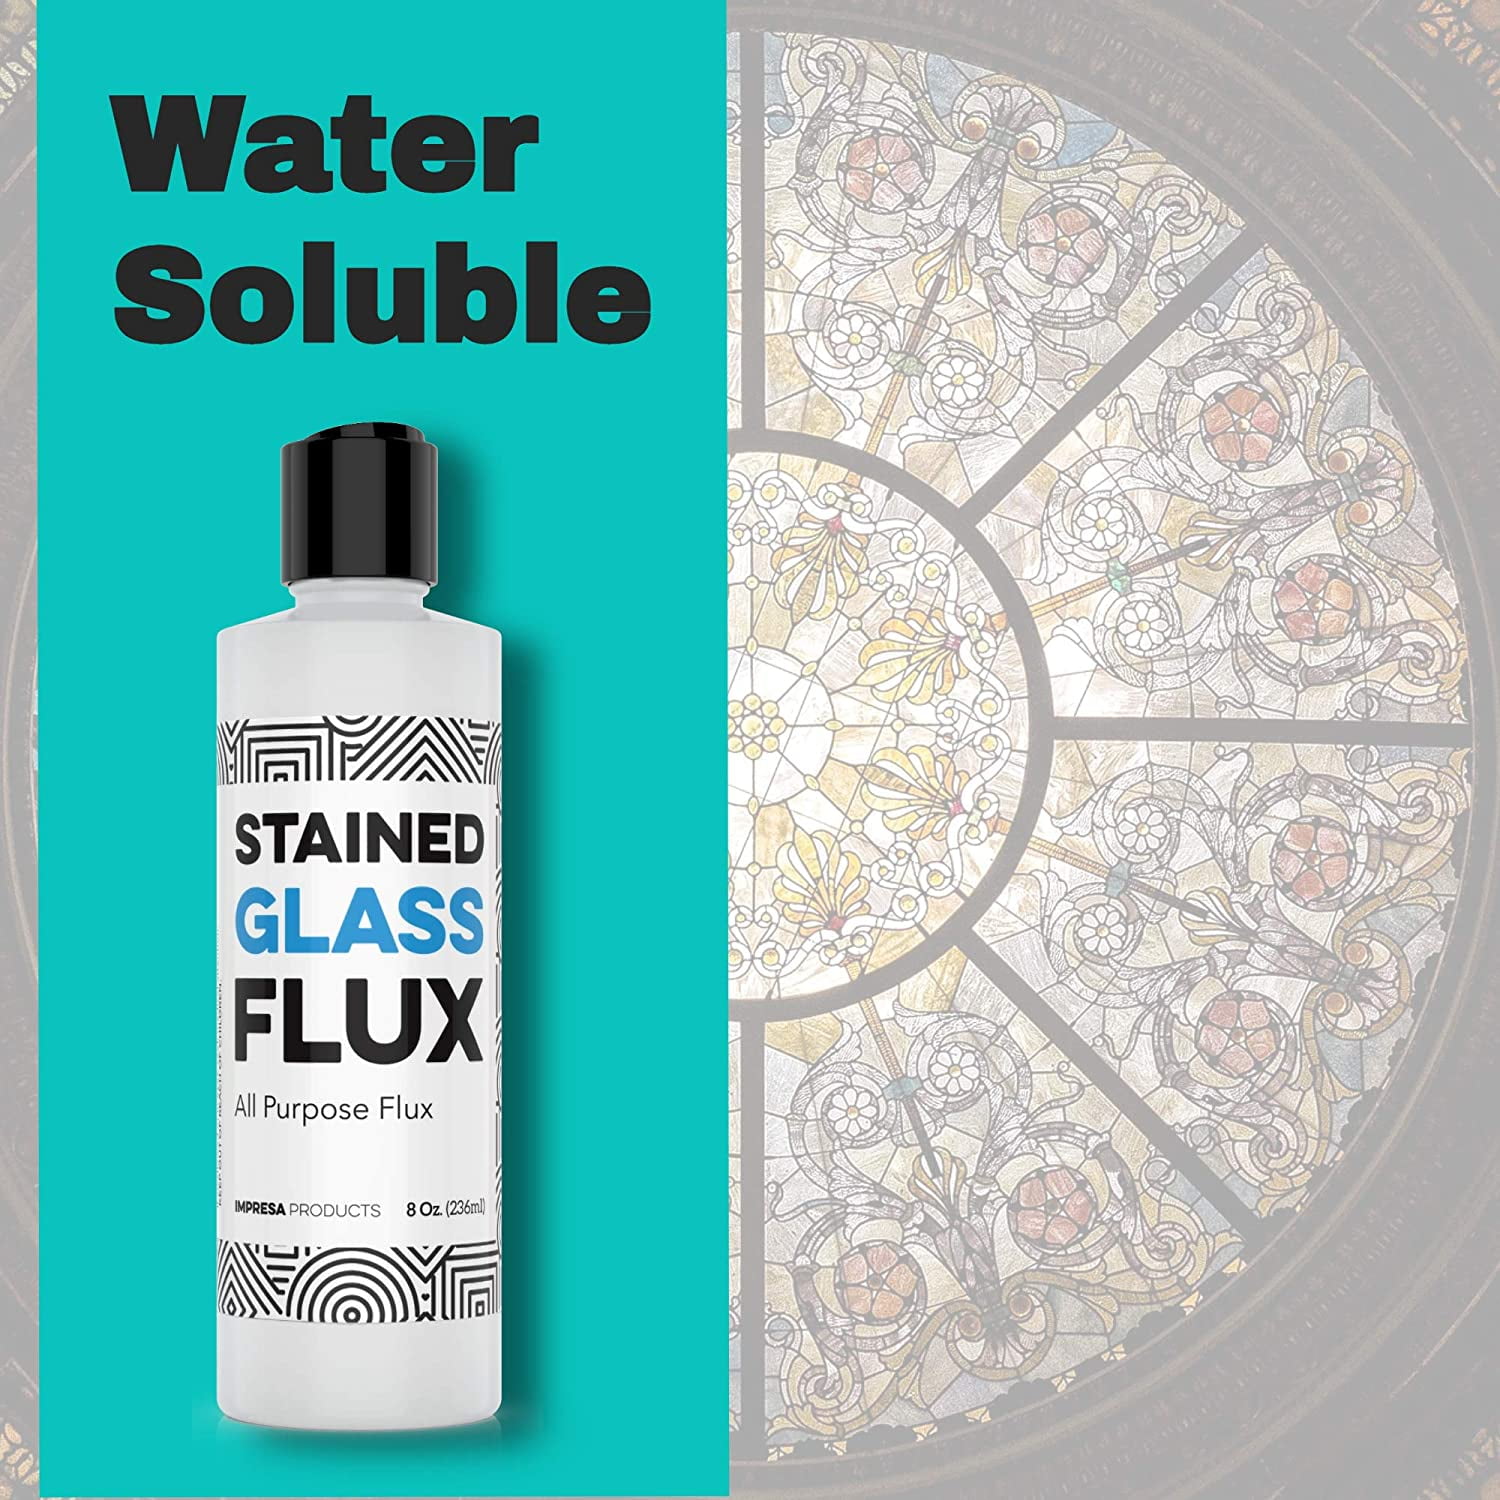 Impresa Products - 8oz Liquid Zinc Flux for Stained Glass